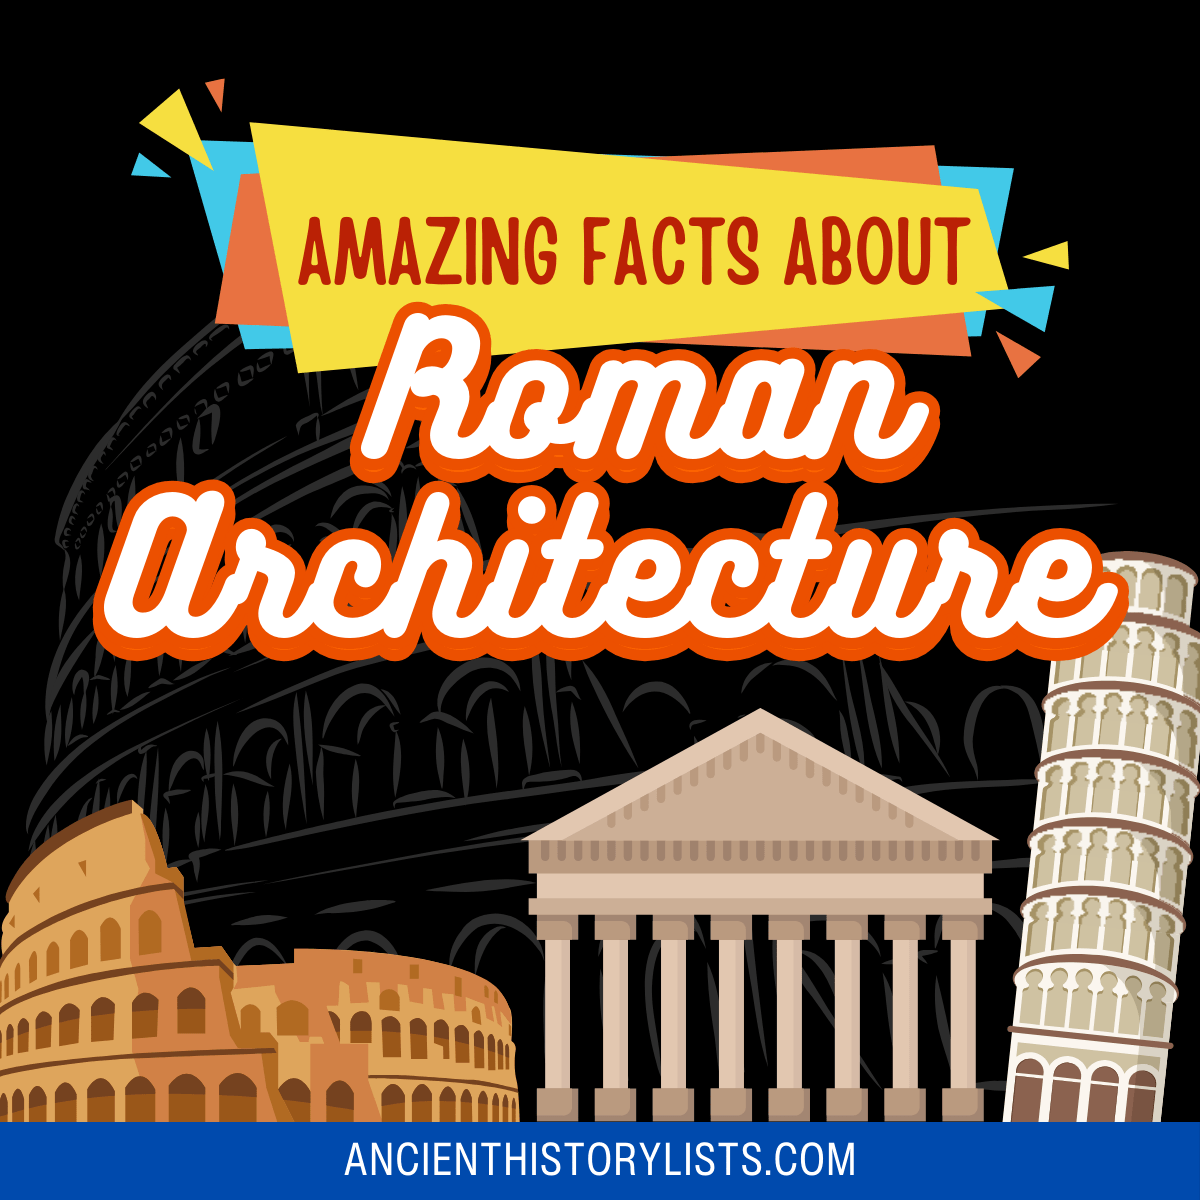 Magnificent Examples of Ancient Roman Architecture